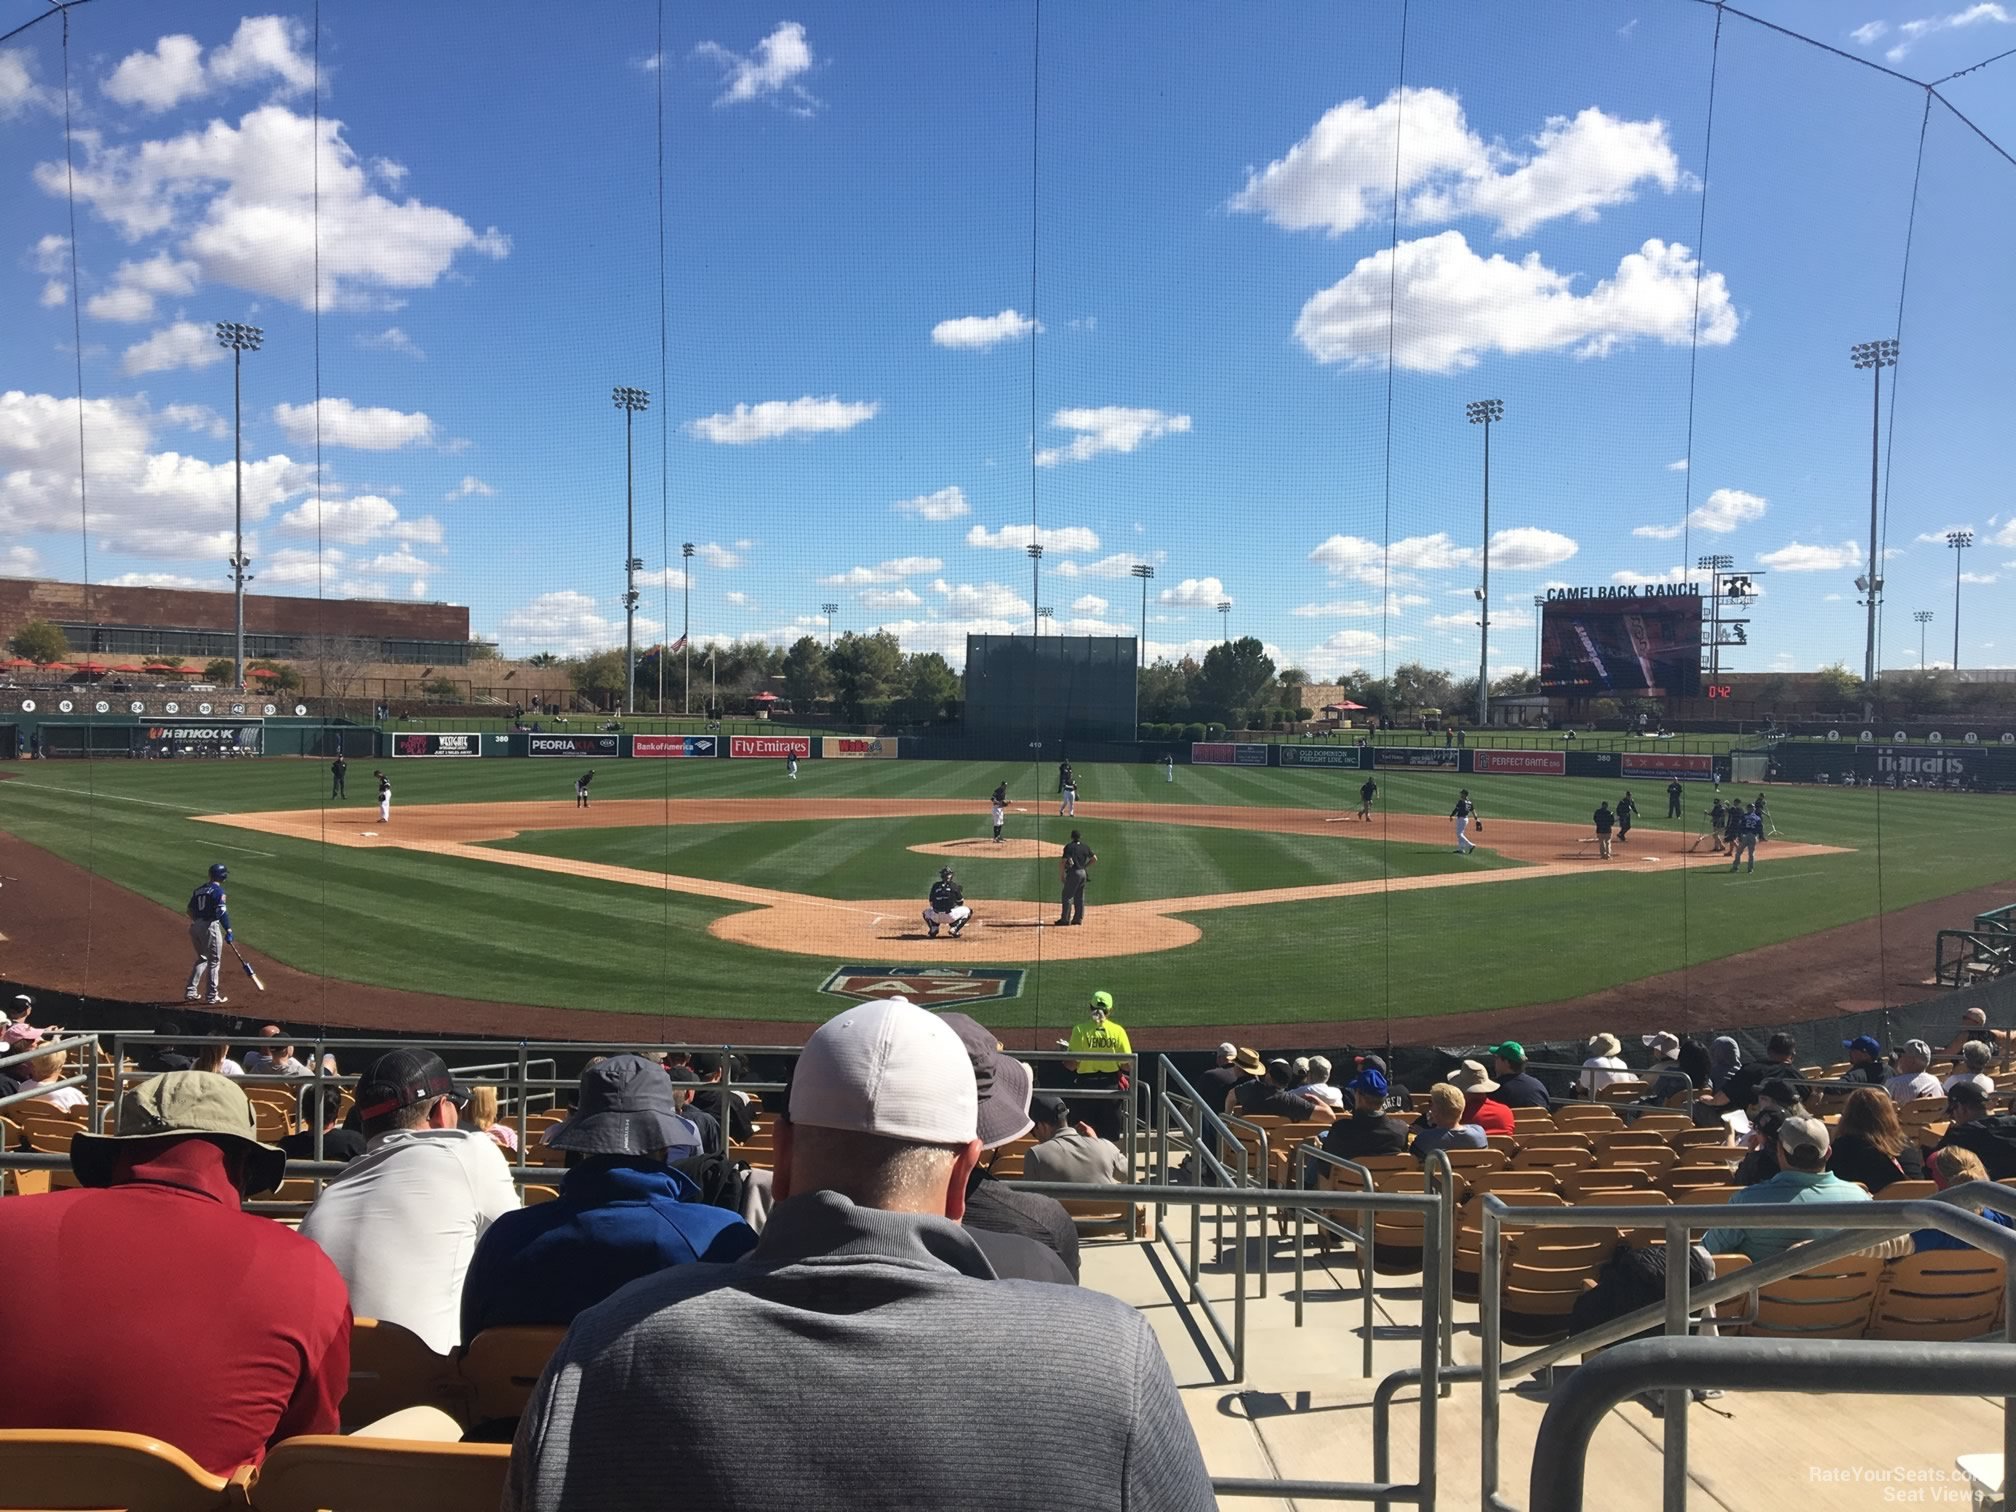 section 115, row 5 seat view  - camelback ranch